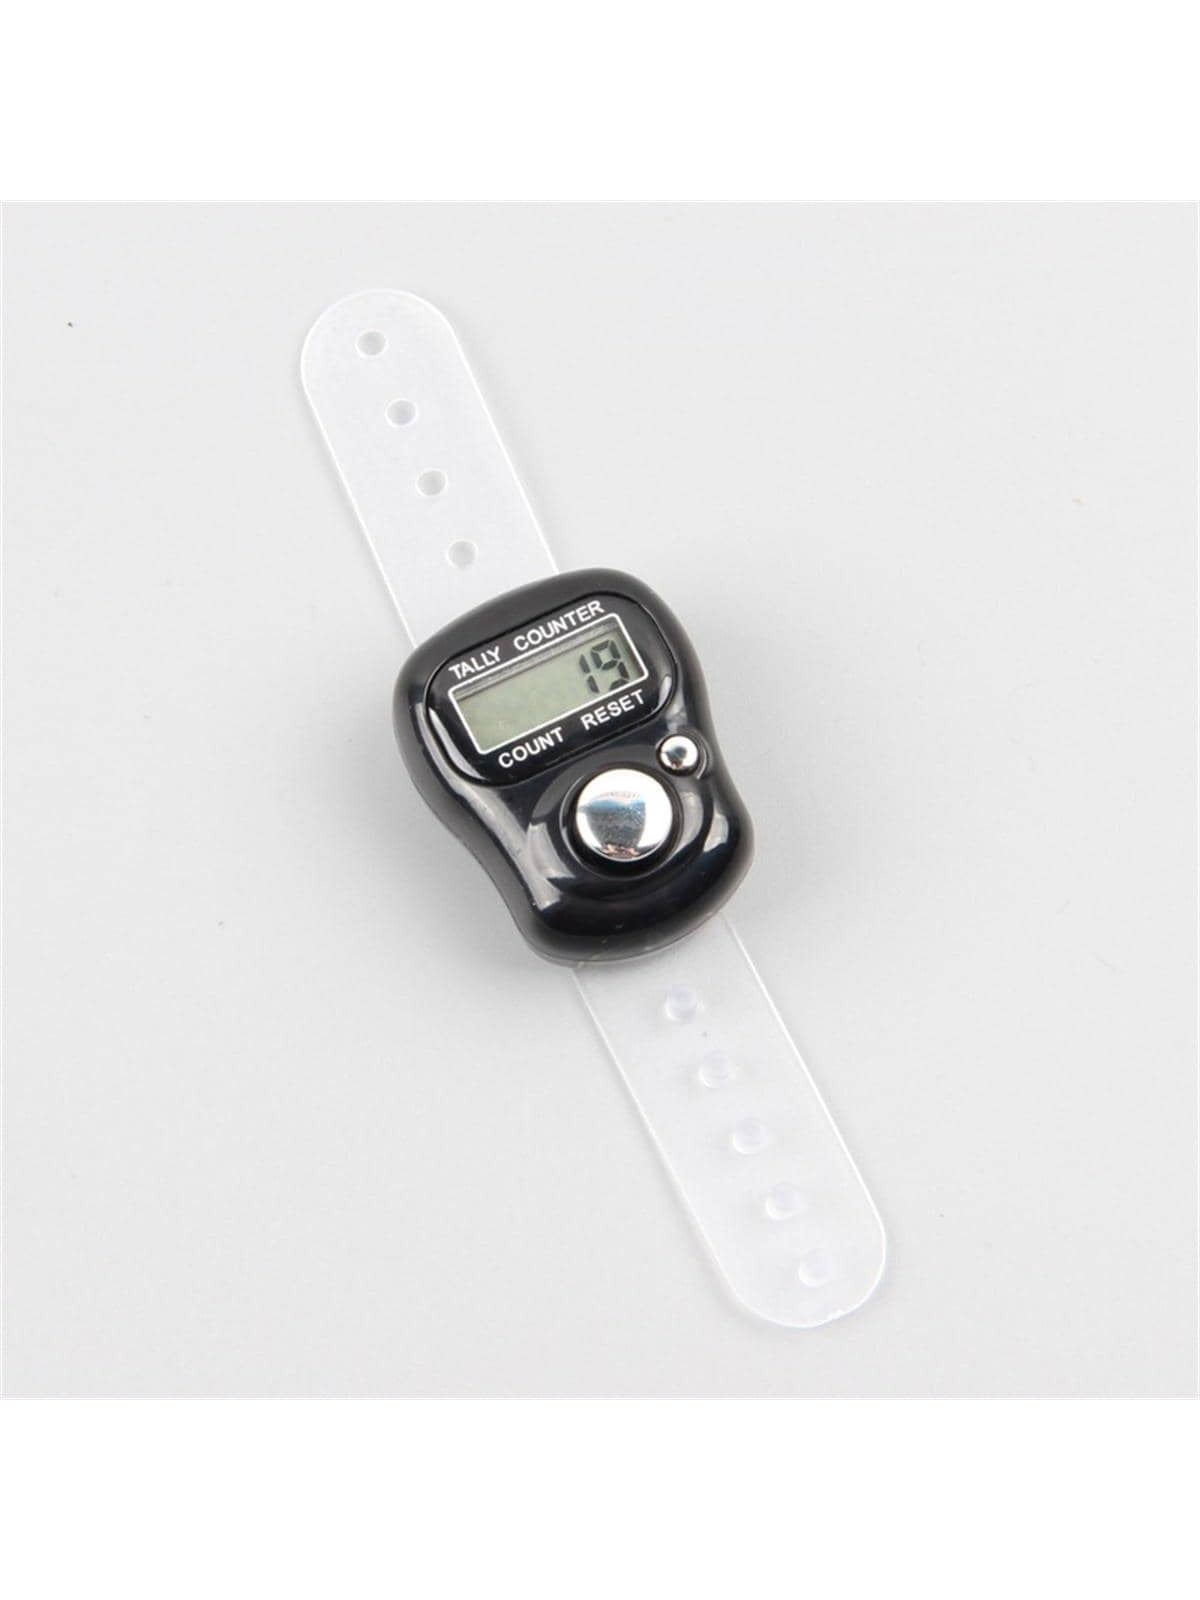 1pc Plastic Electronic Button Counter, Modern Digital Counter For Home